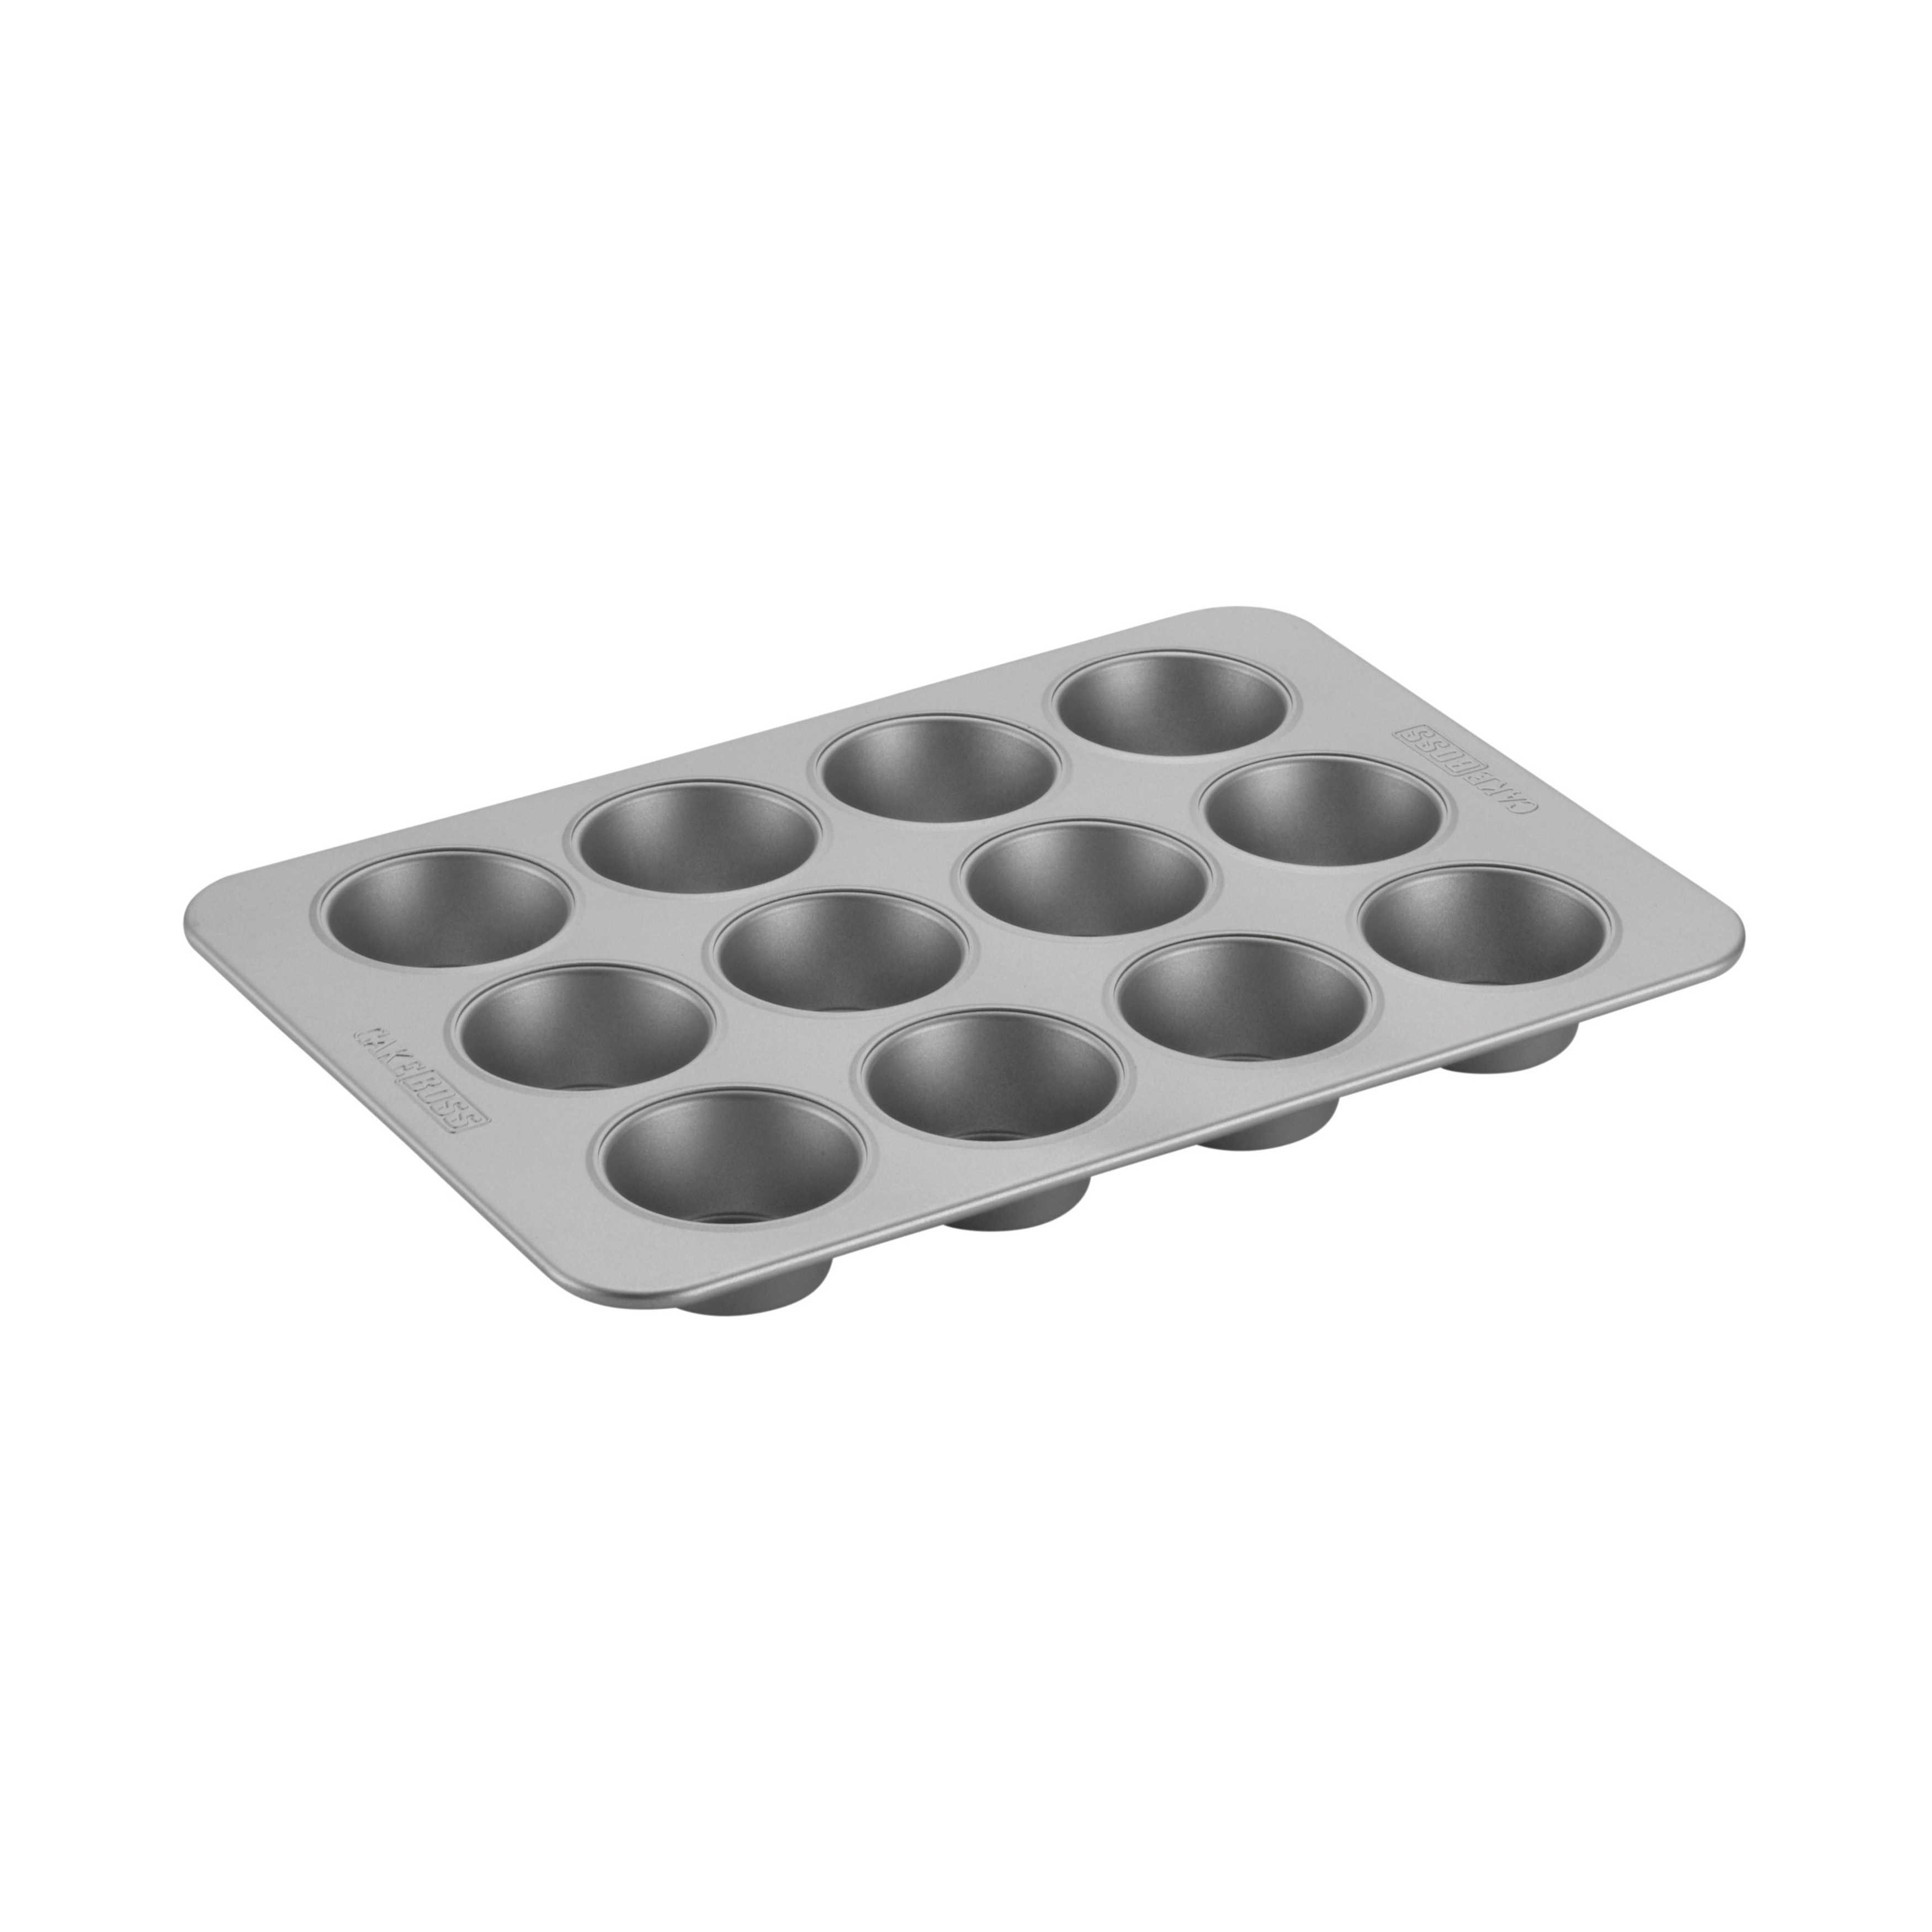 https://ak1.ostkcdn.com/images/products/9045417/Cake-Boss-Professional-Silver-Nonstick-Bakeware-12-Cup-Muffin-Pan-L16242753.jpg